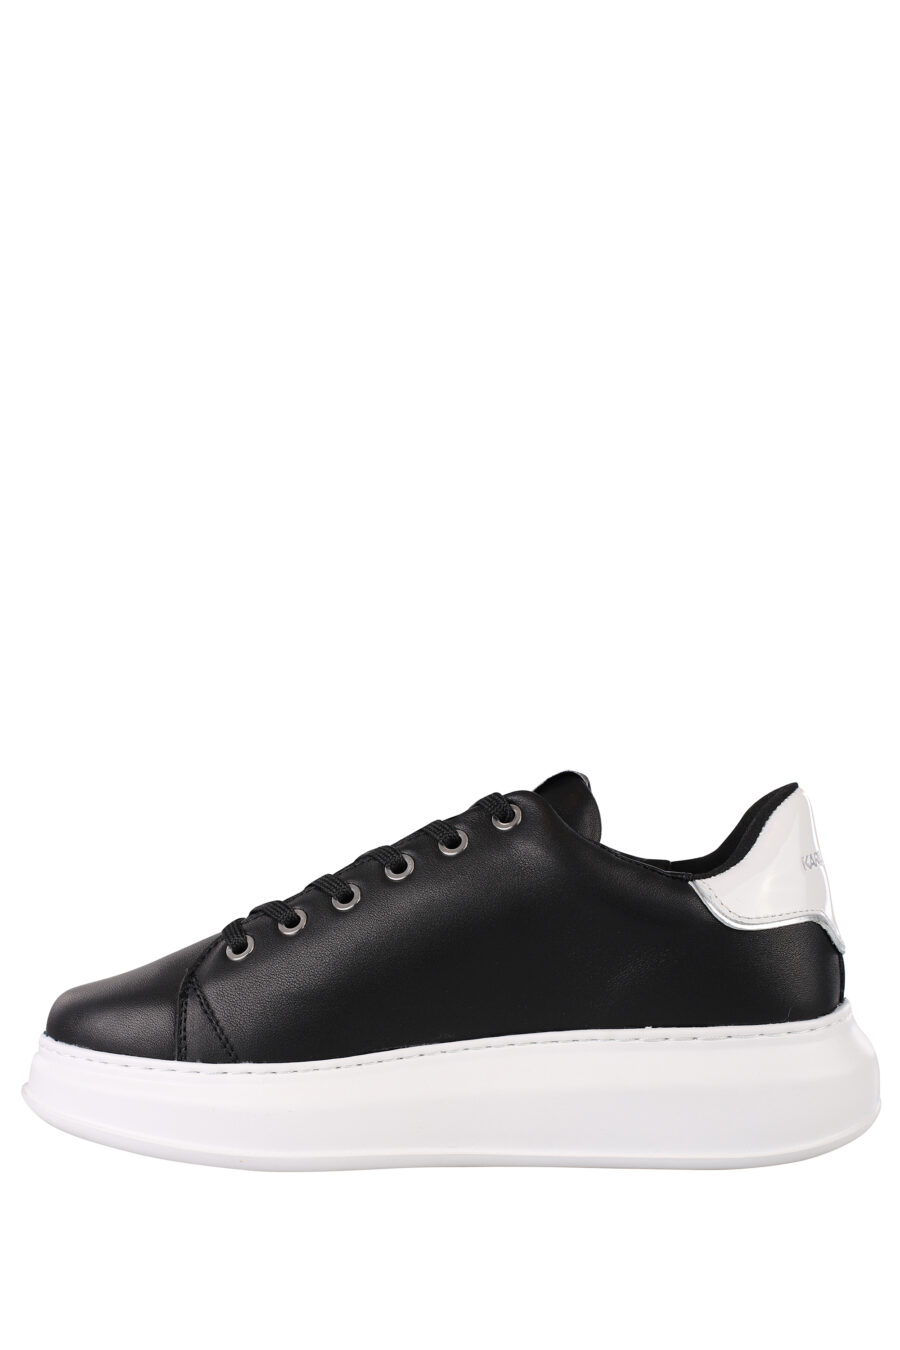 Black trainers with silver metal lettering logo - IMG 1388